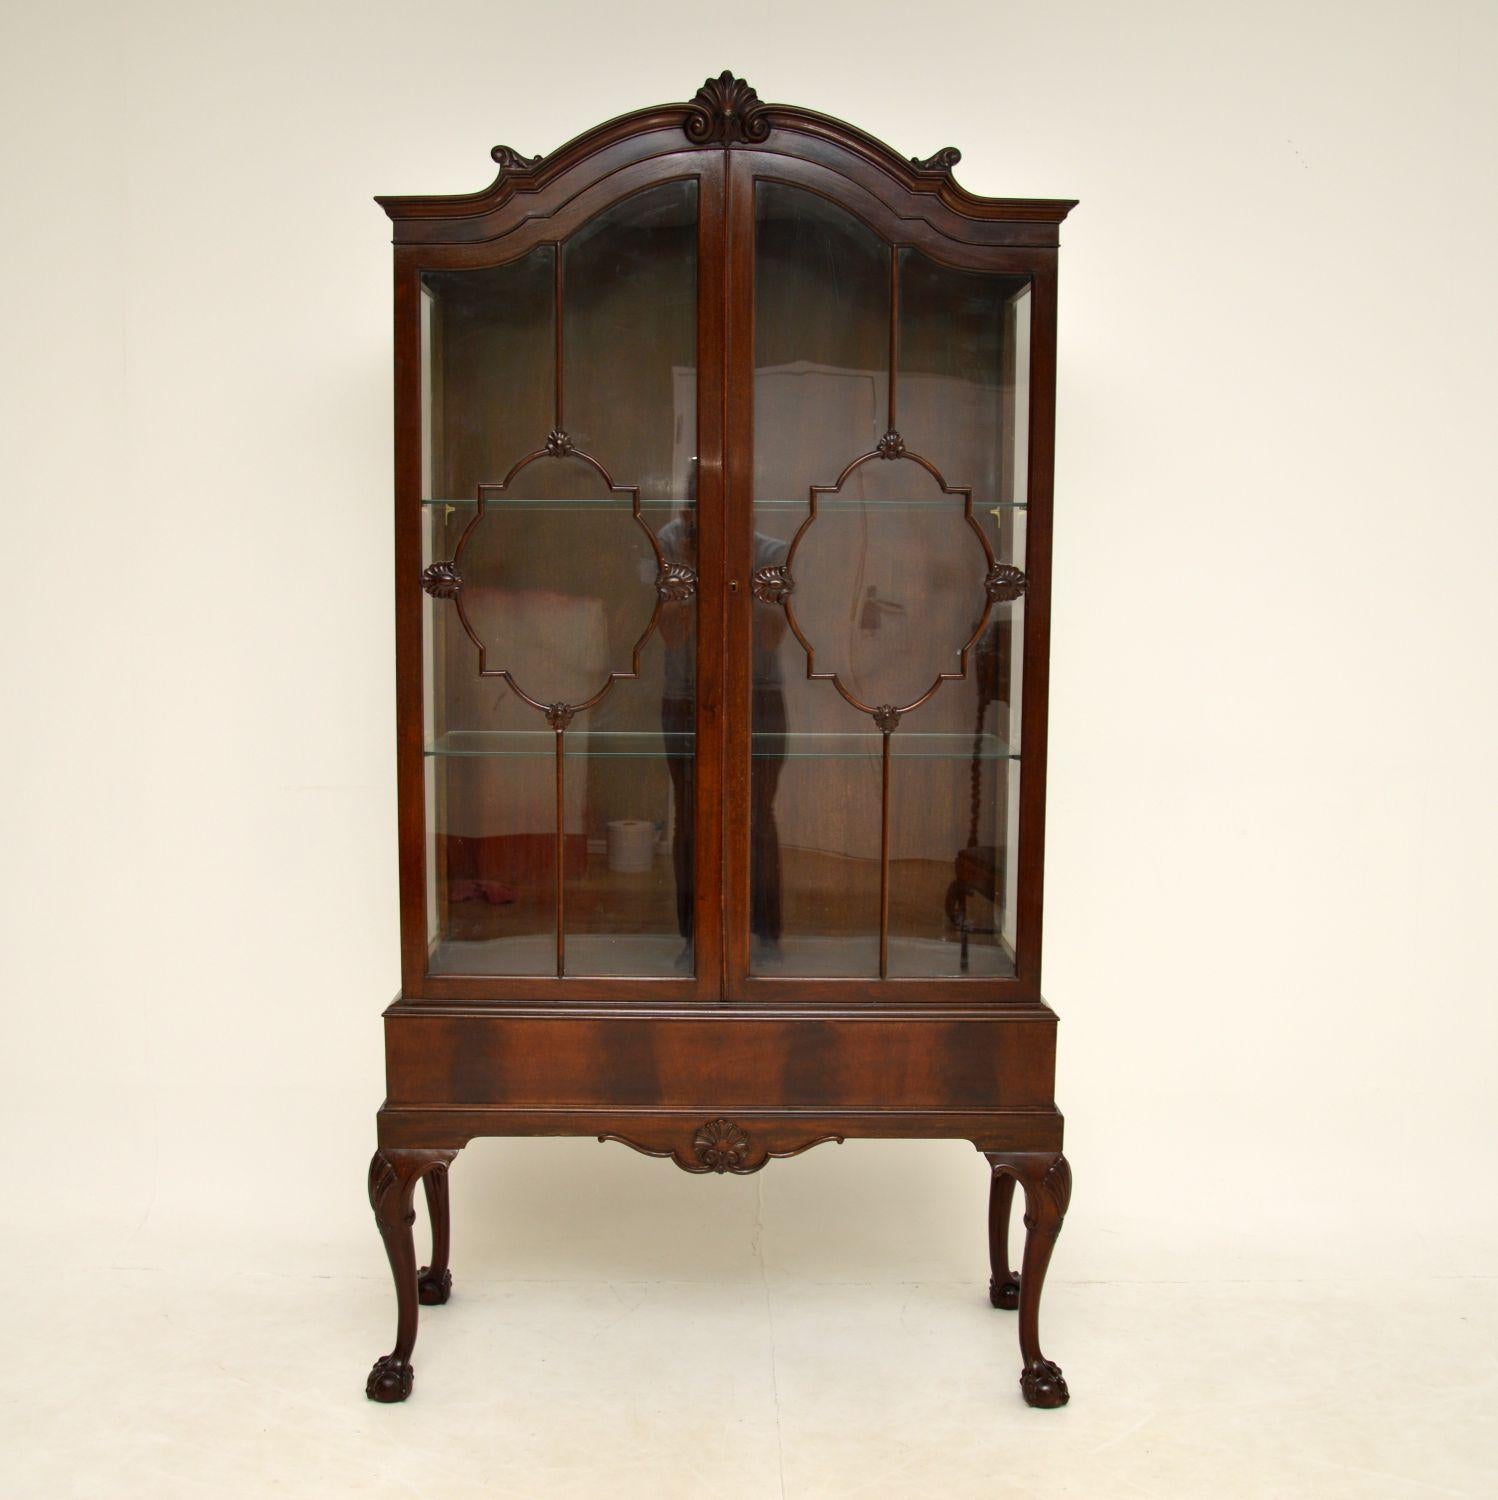 A beautiful and very well made antique Chippendale style mahogany display cabinet. This was made in England & dates from around the 1880-1900 period.

It is of extremely fine quality, with wonderful astral glazed doors. The base has excellent